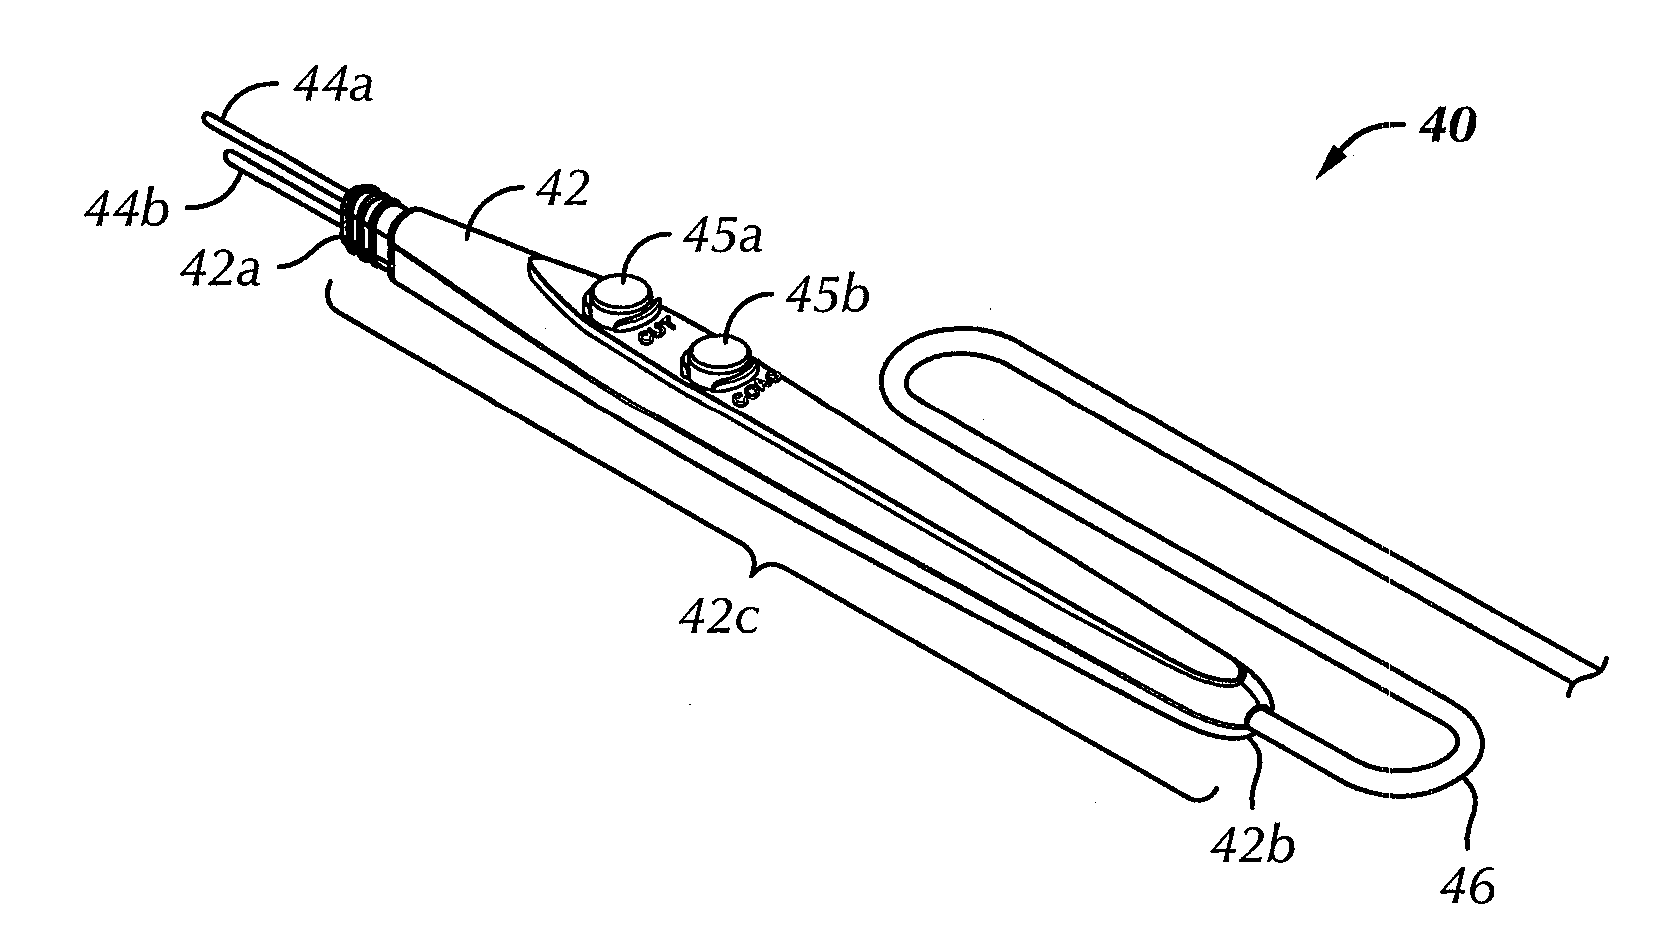 Electrosurgical Generator Having Boost Mode Control Based on Impedance